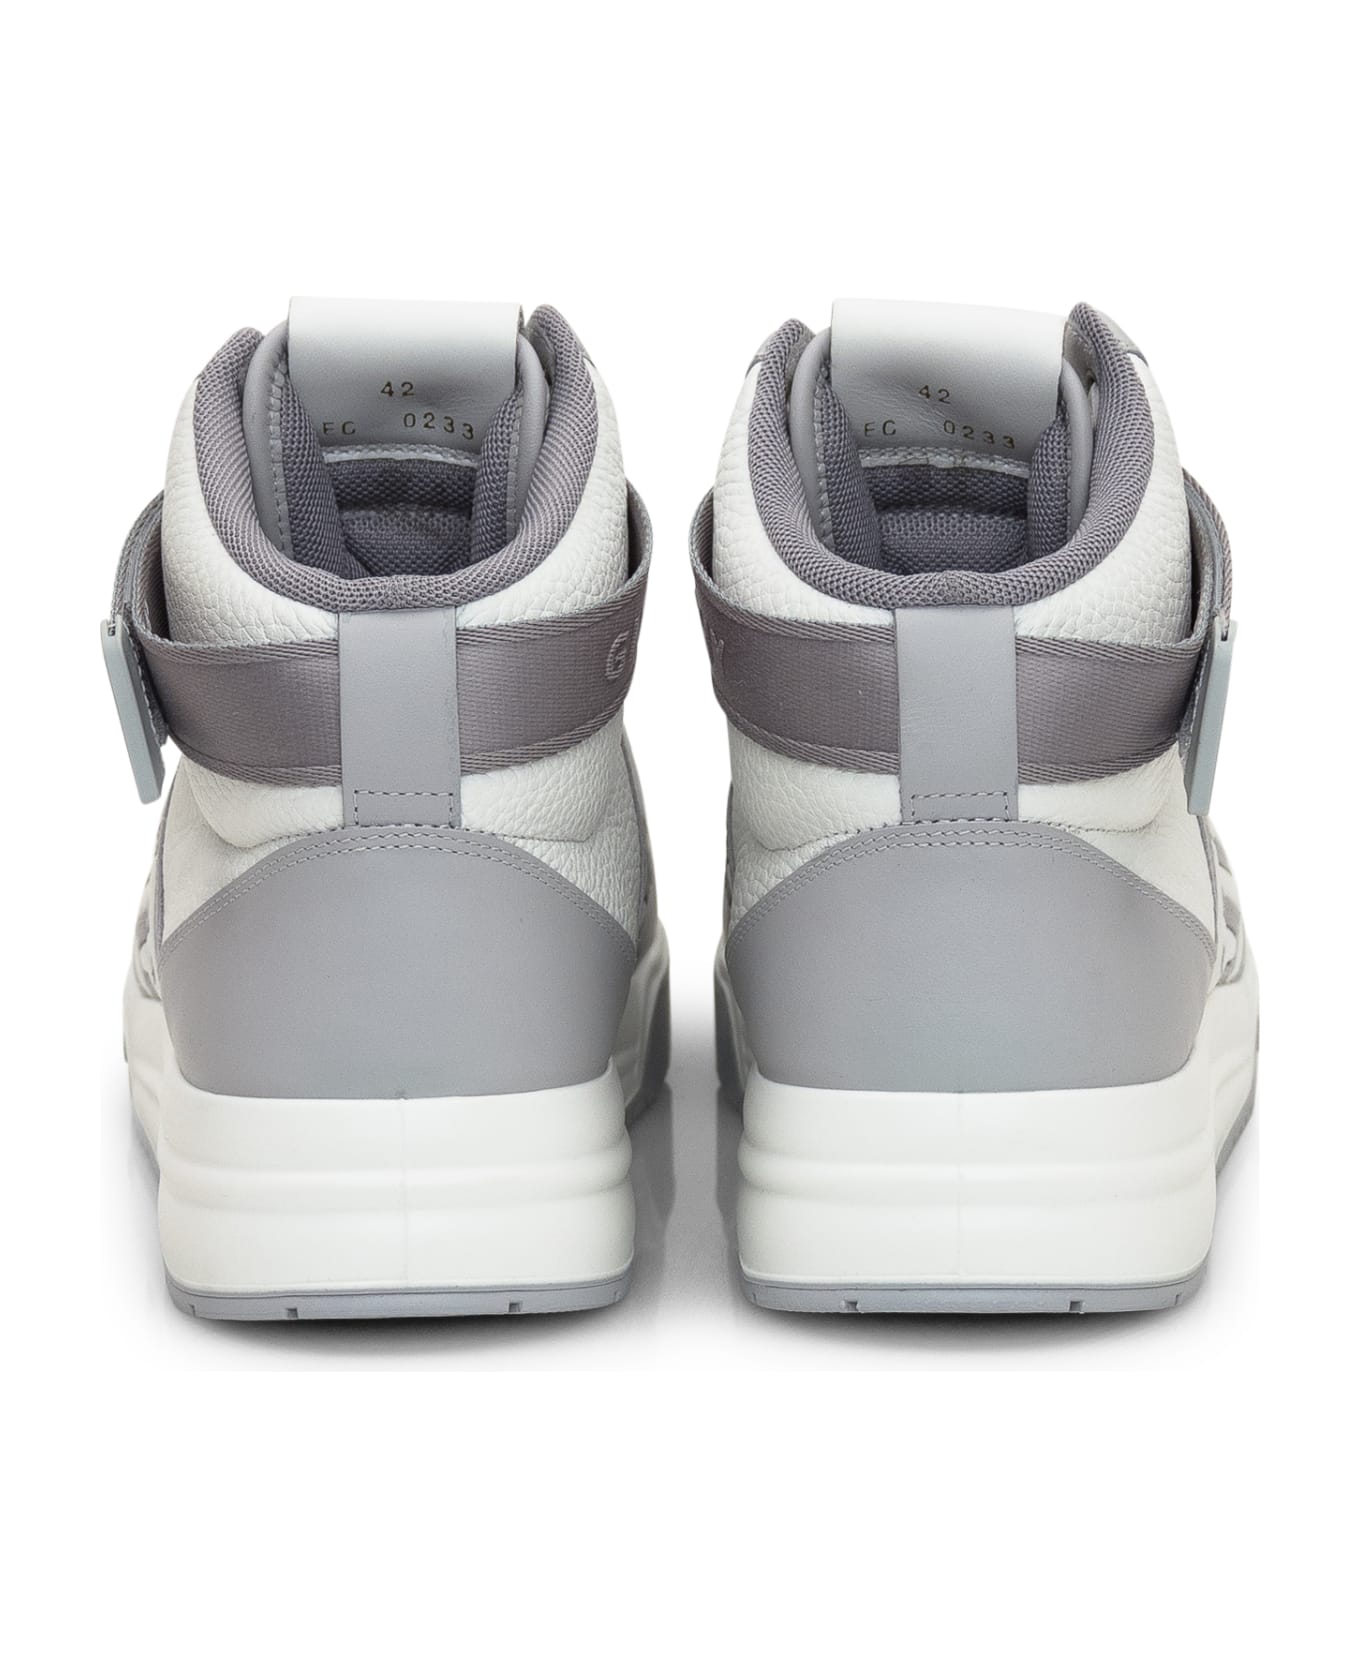 Givenchy G4 High Sneaker - Grey